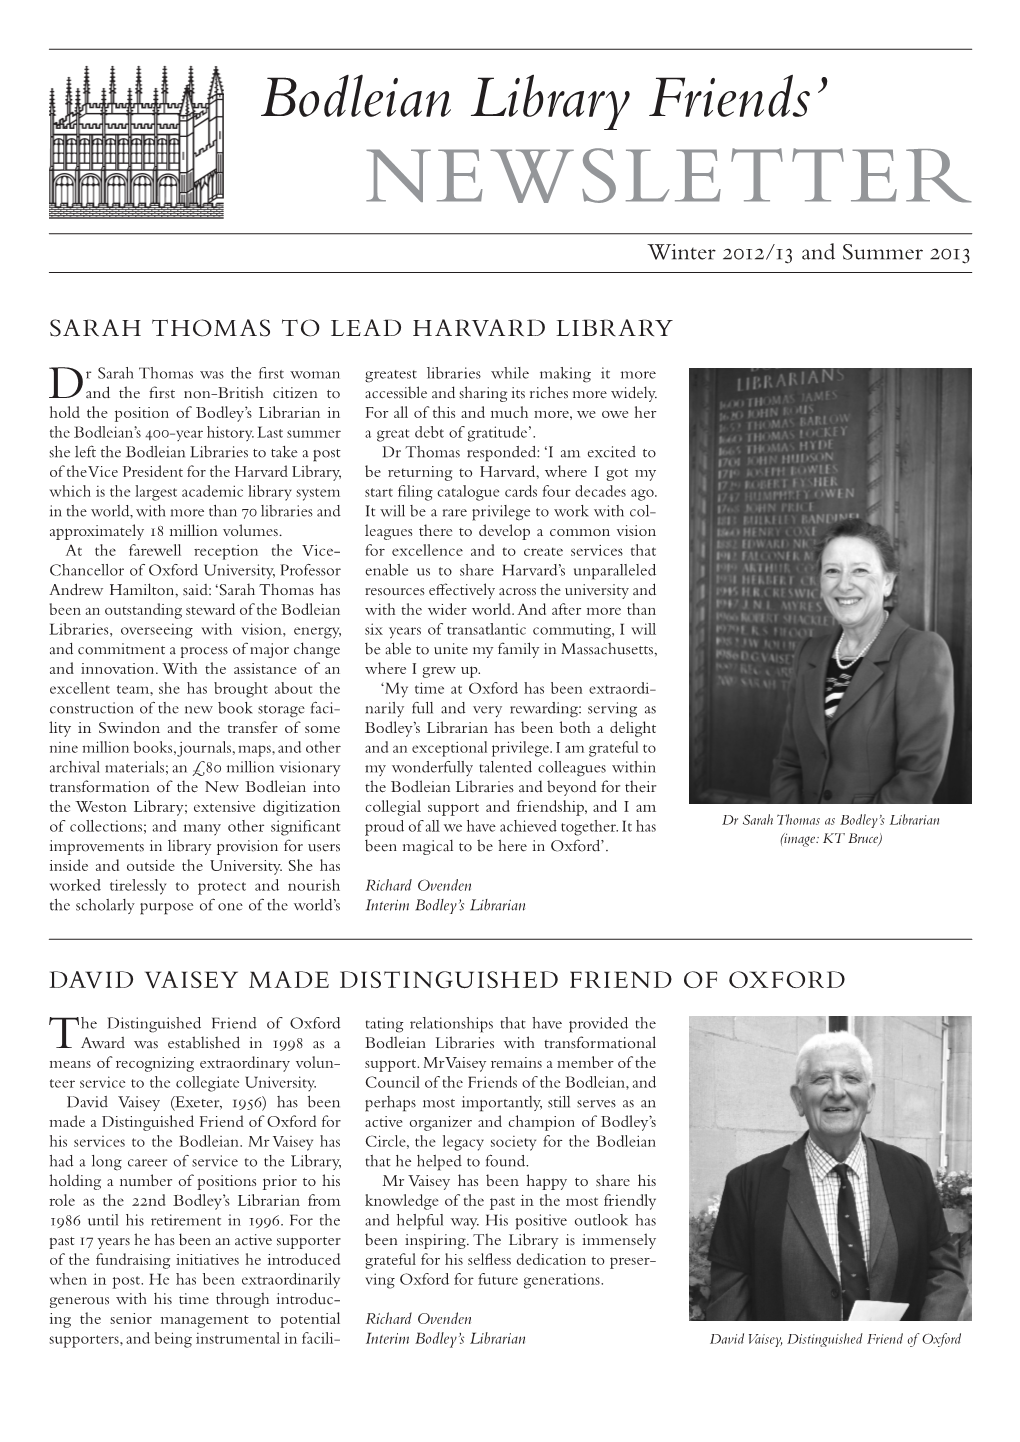 NEWSLETTER Bodleian Libraries Winter 2012/13 and Summer 2013 UNIVERSITY of OXFORD SARAH THOMAS to LEAD HARVARD LIBRARY